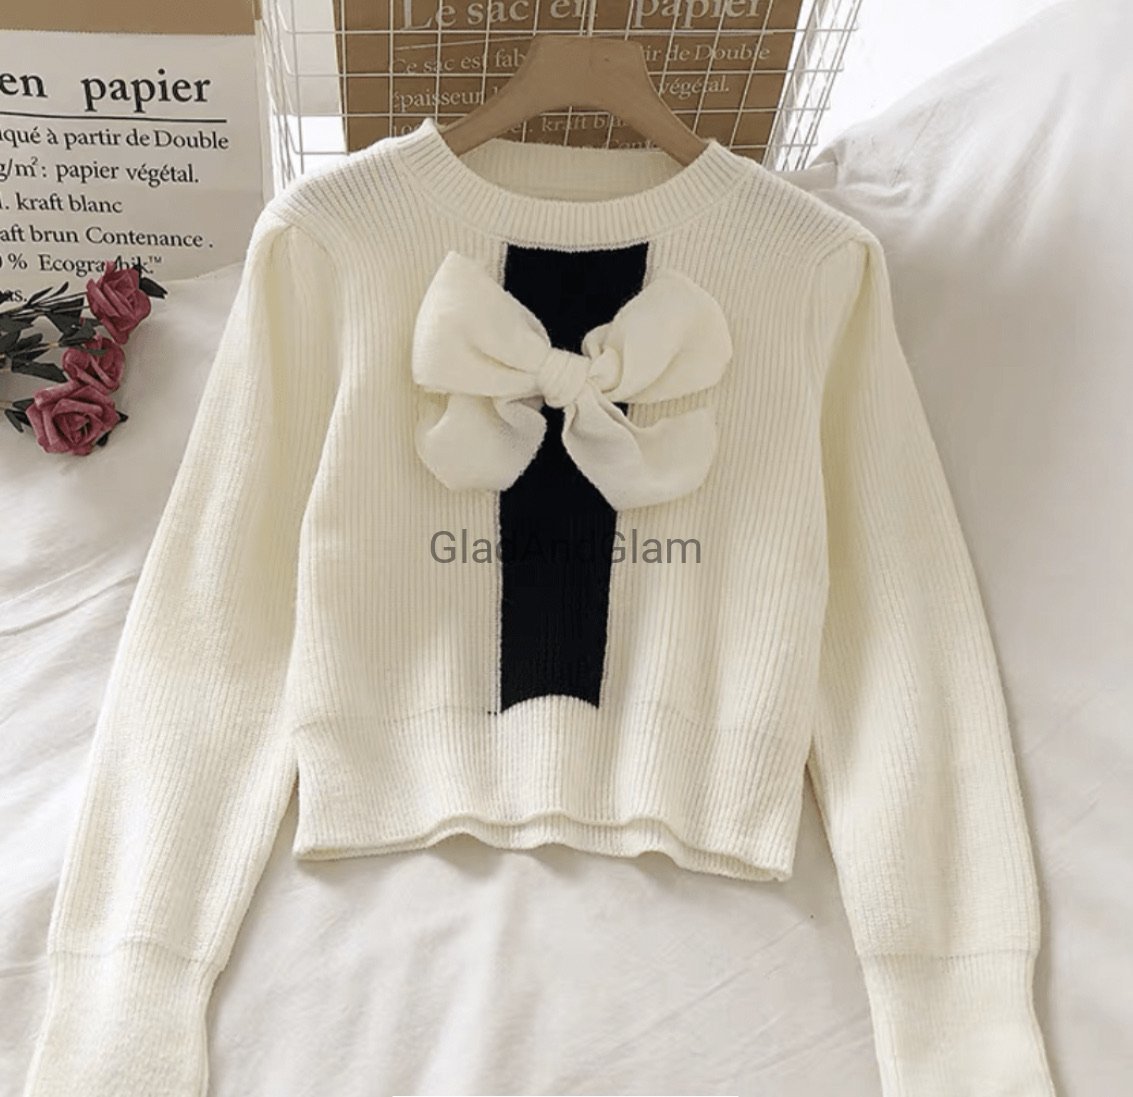 glad and glam sweaters